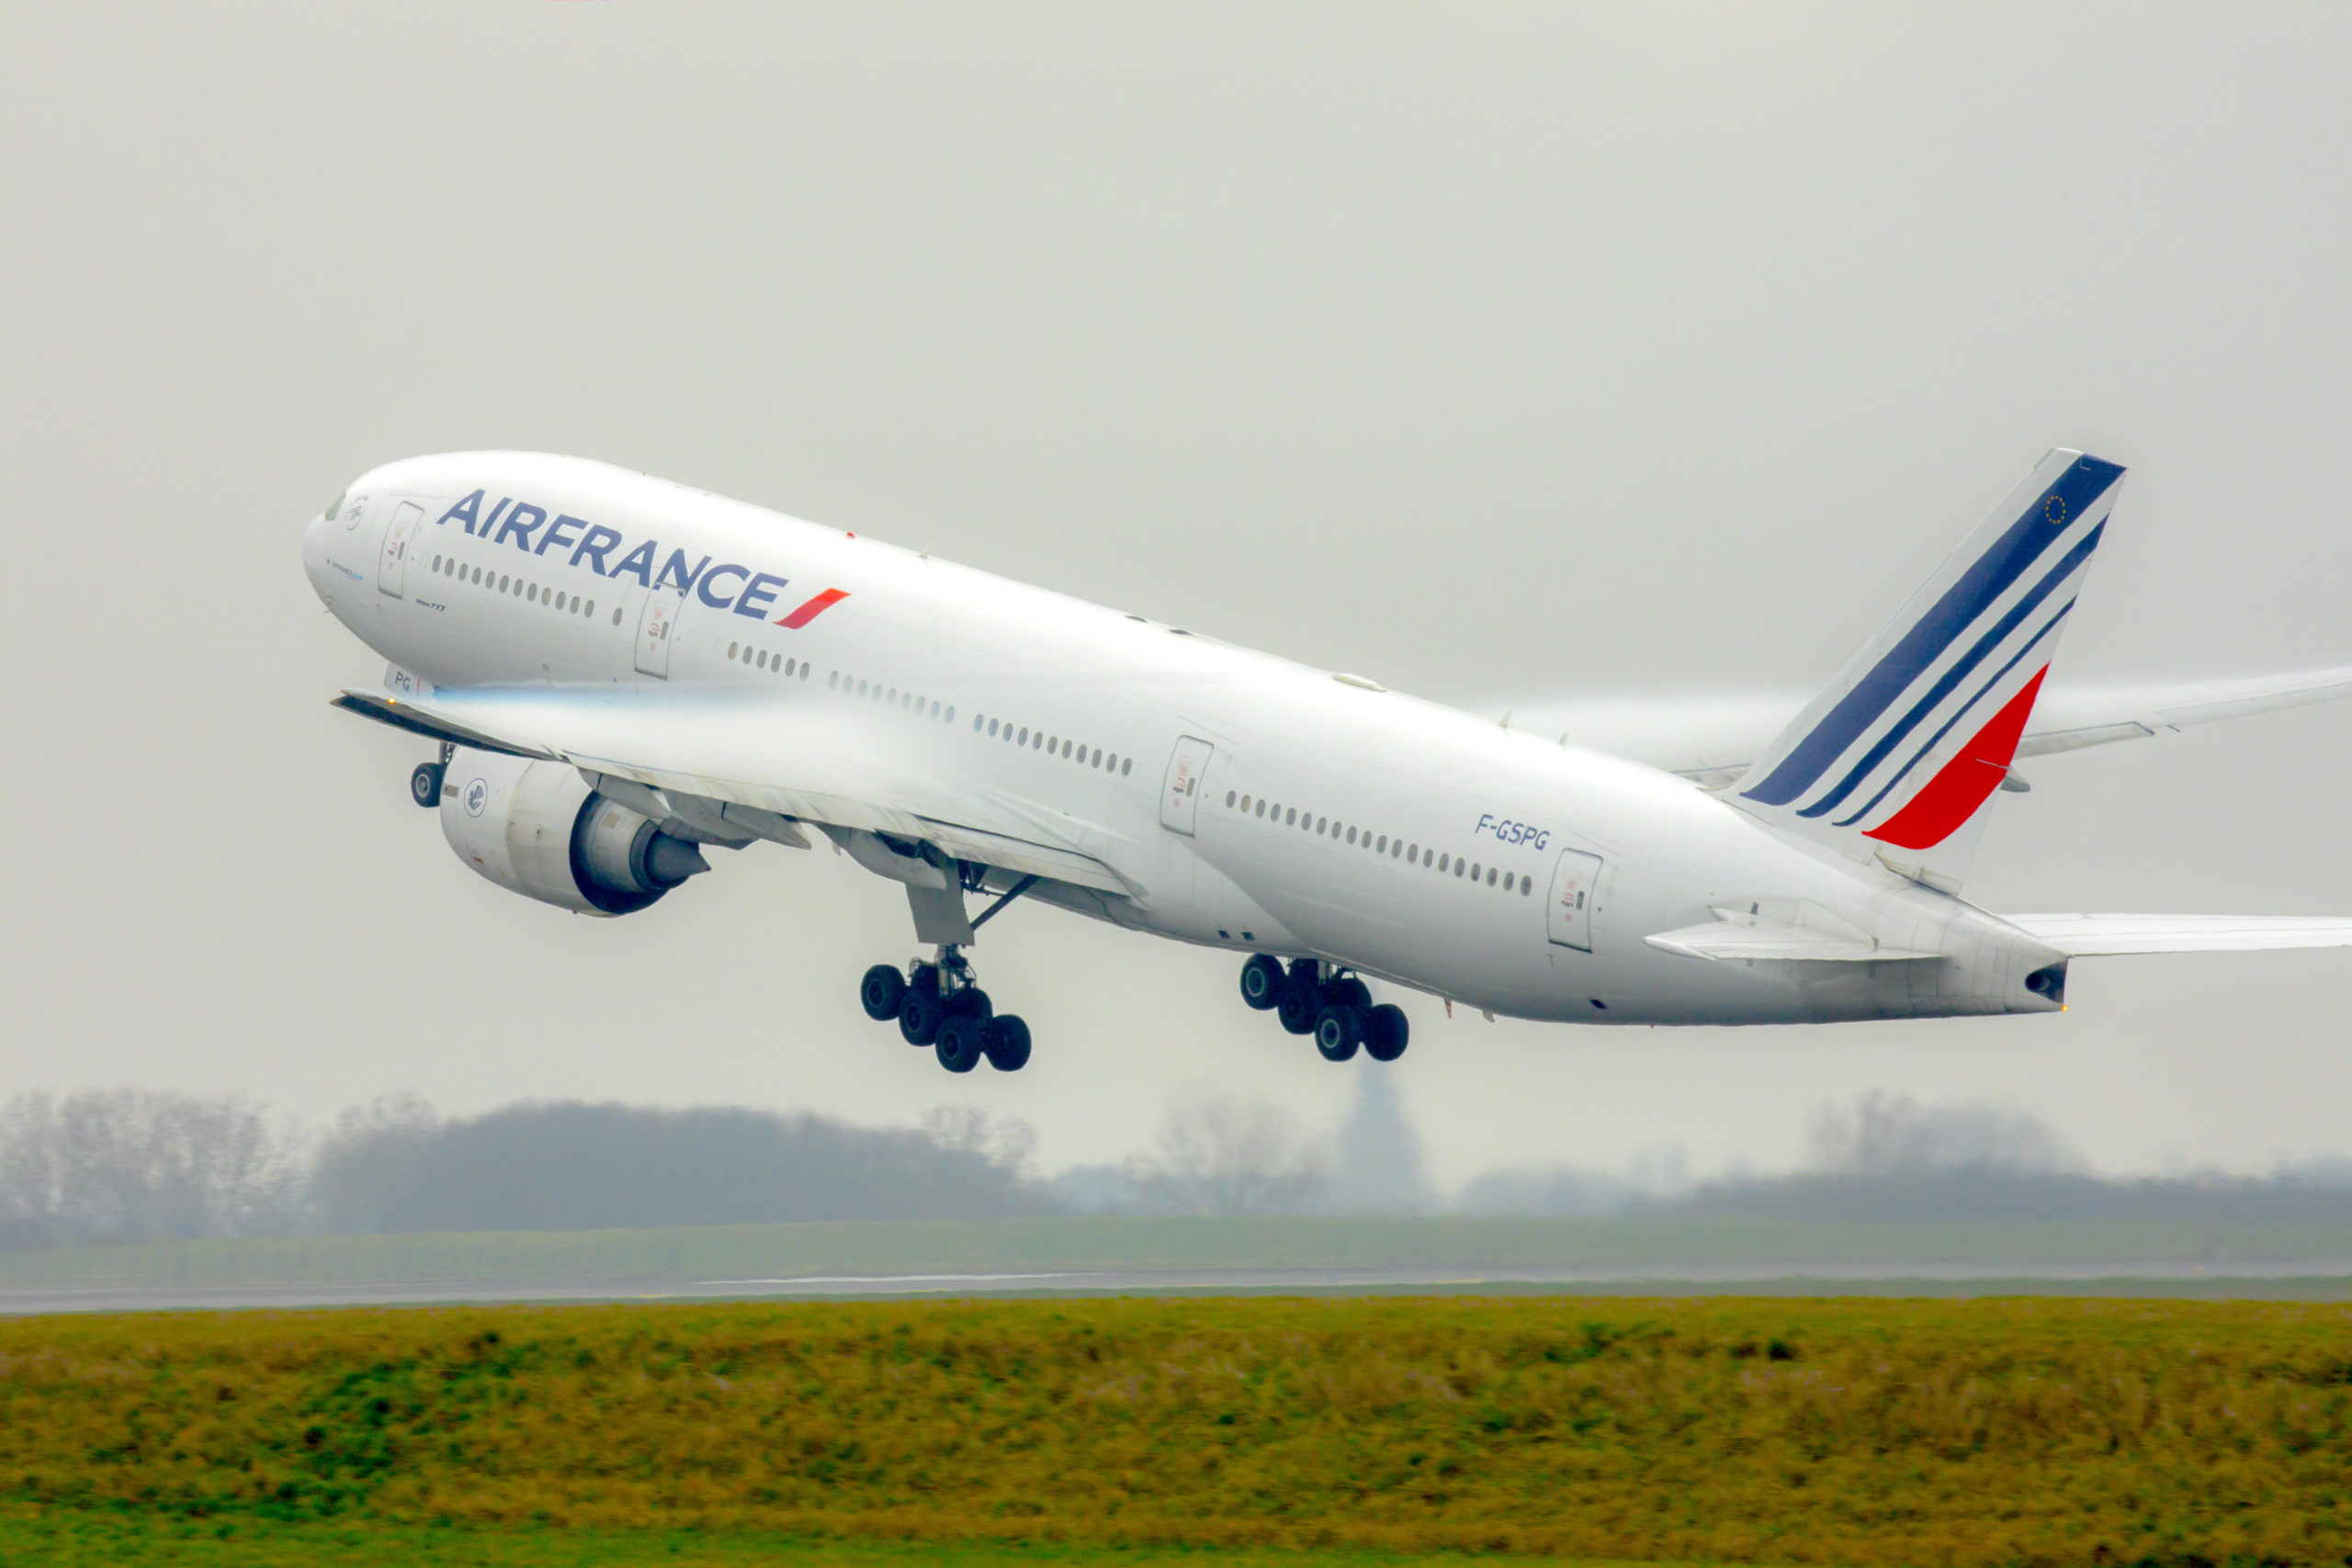 An Air France plane in the sky